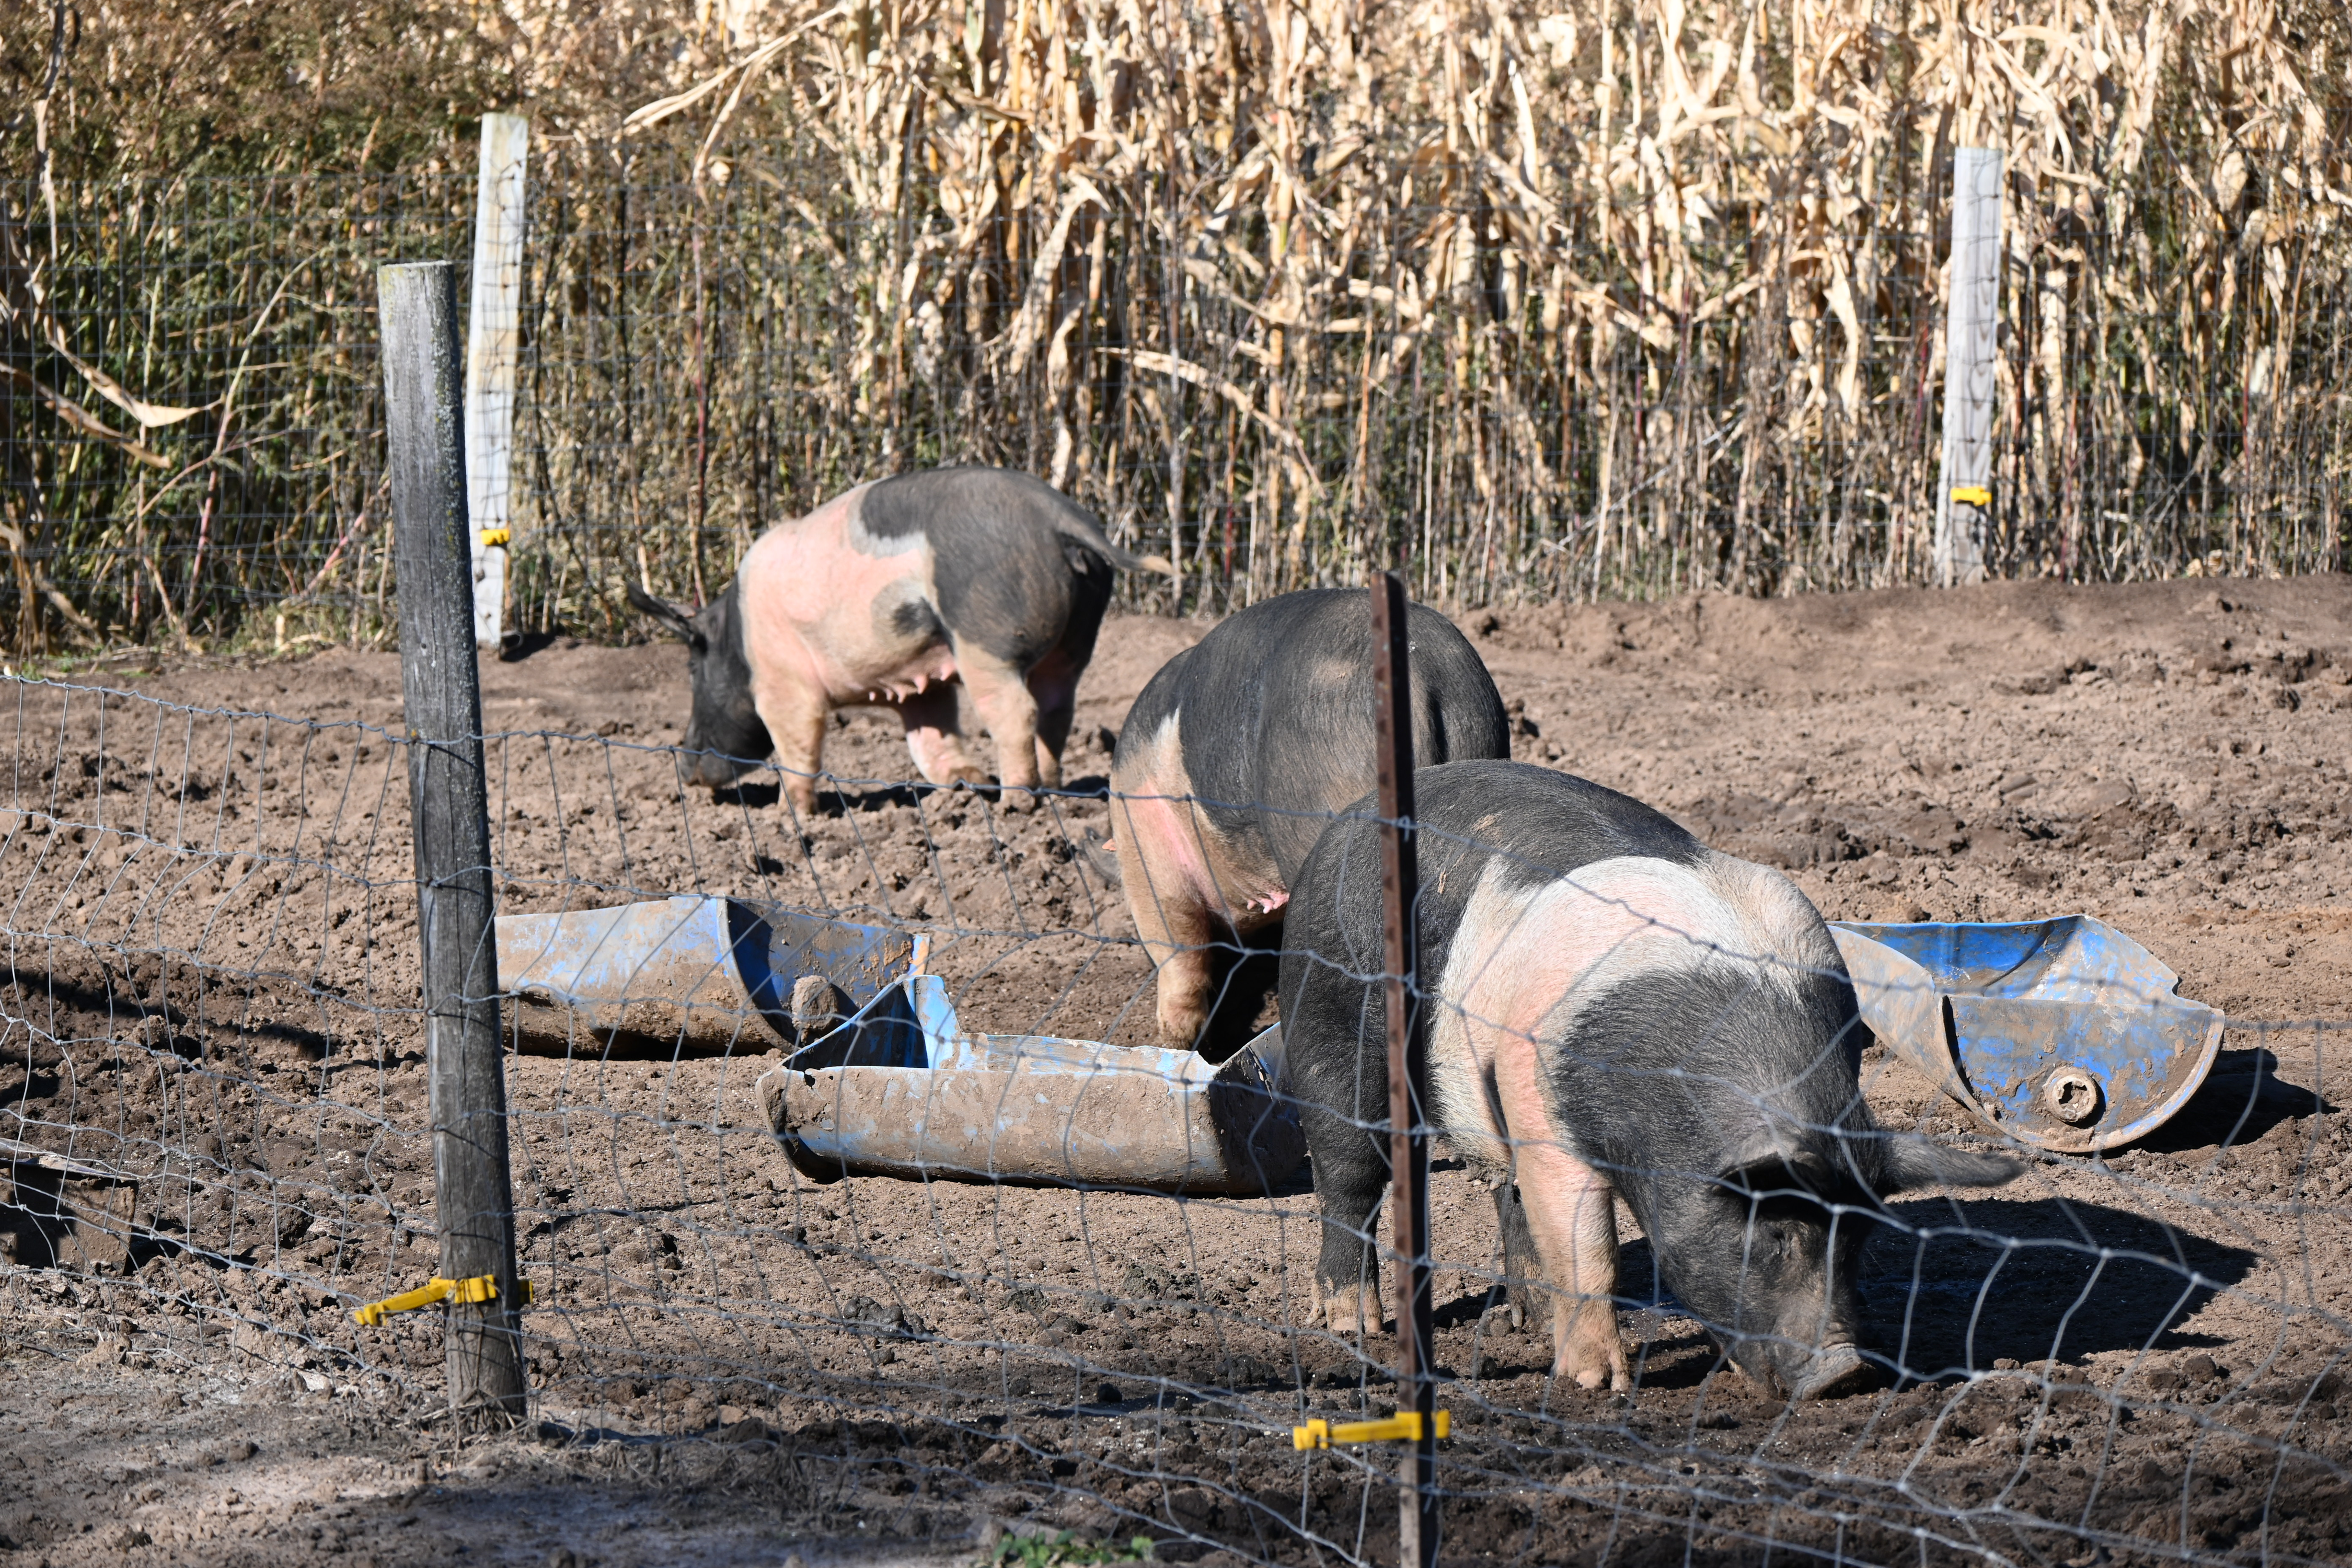 African Swine Fever Update: Vaccine and More